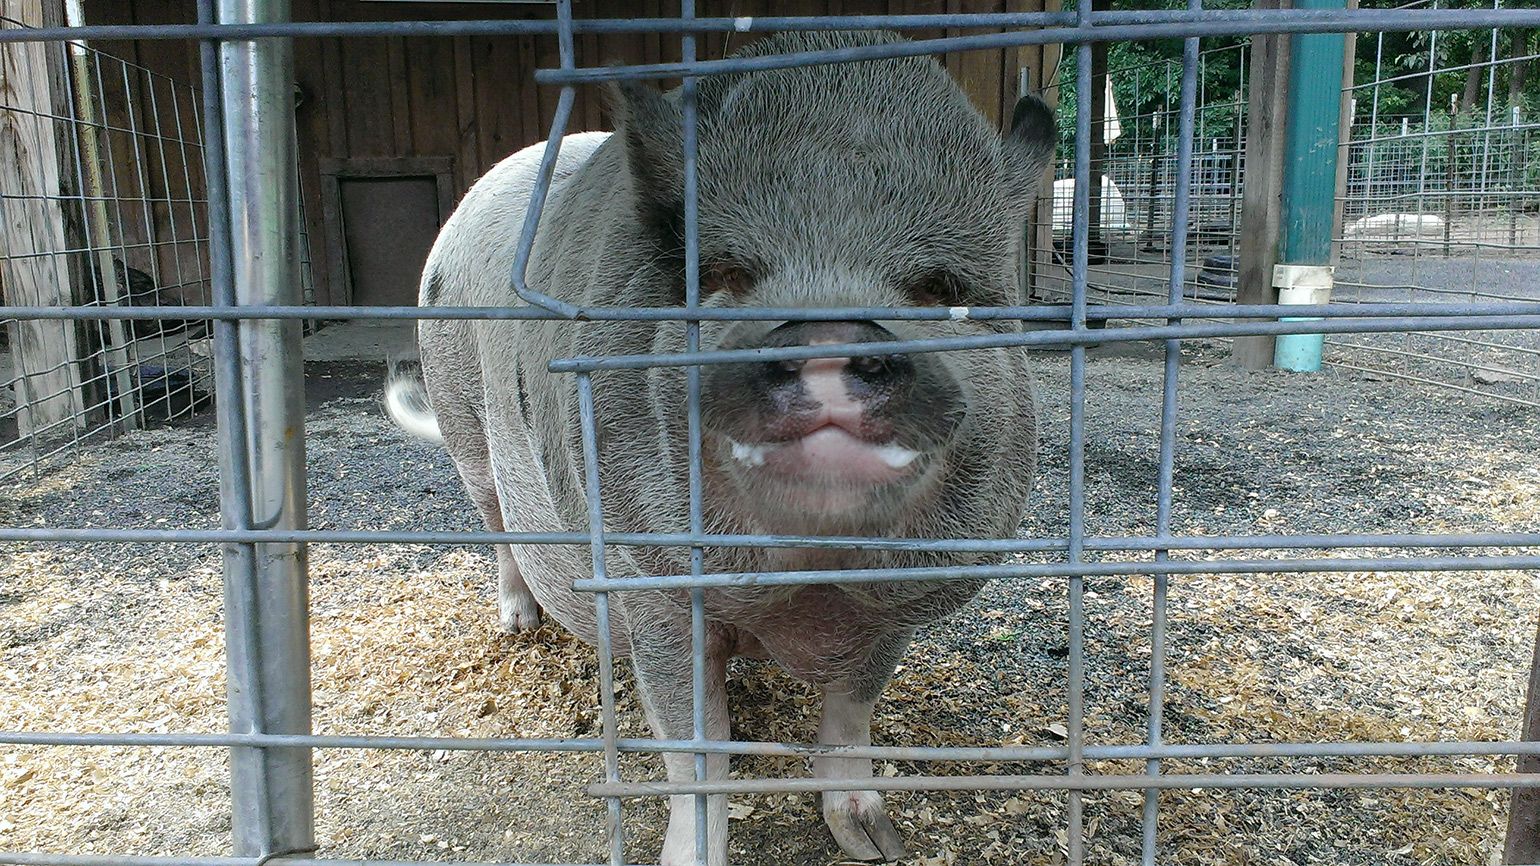 The farm is home to pigs of all different sizes, shapes, personalities and ages.